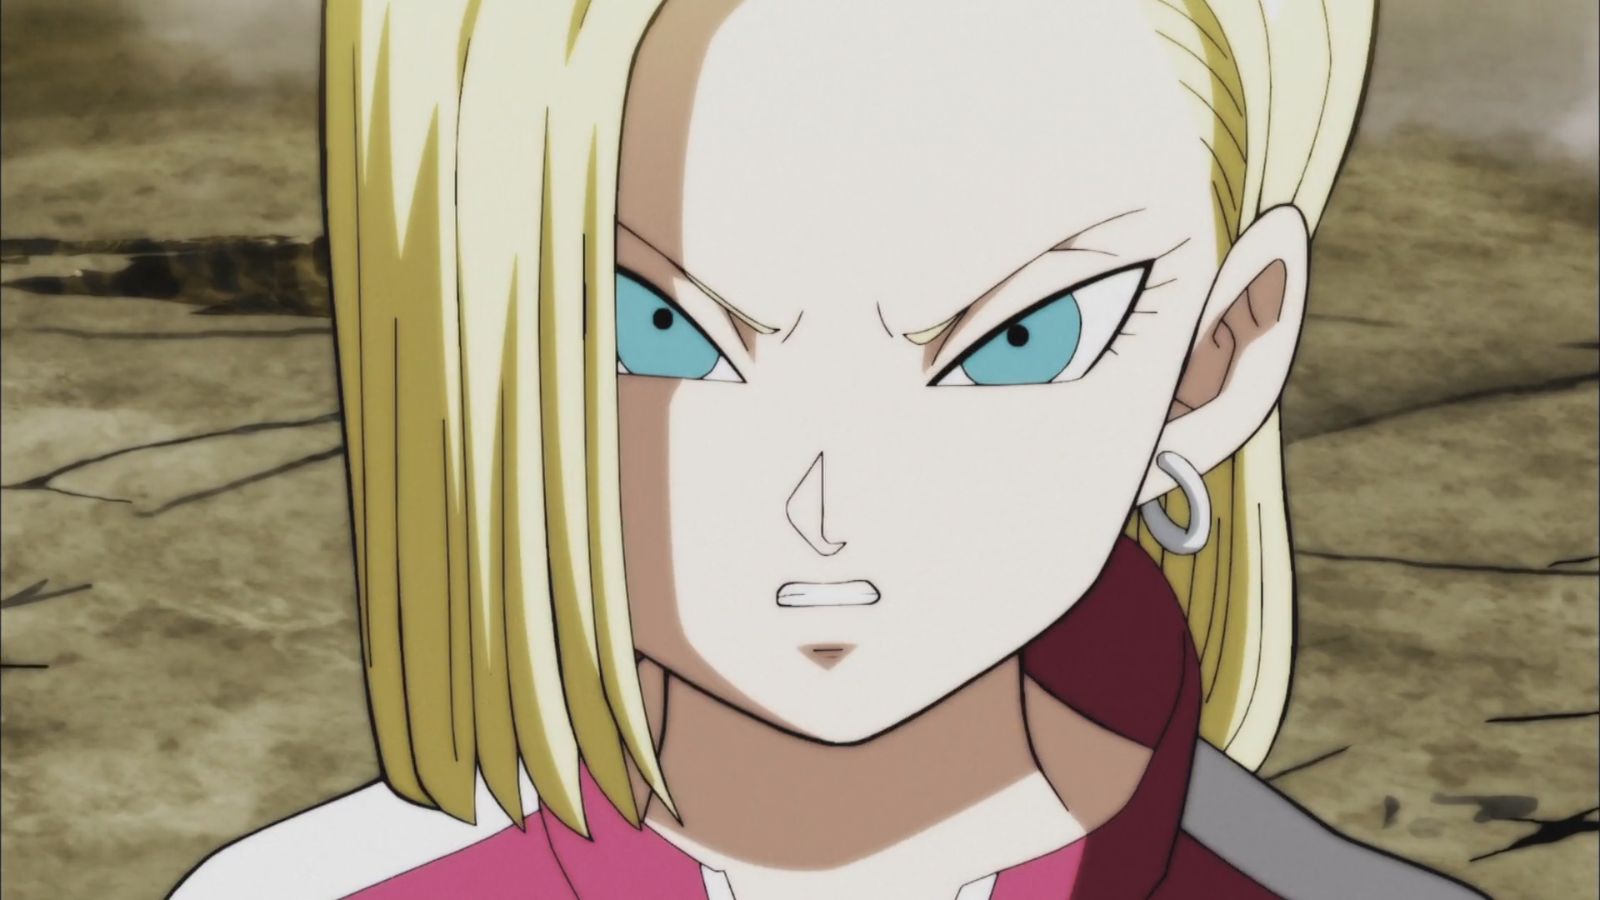 Android18 Highres Face - Android 18 Facial Expressions - HD Wallpaper 